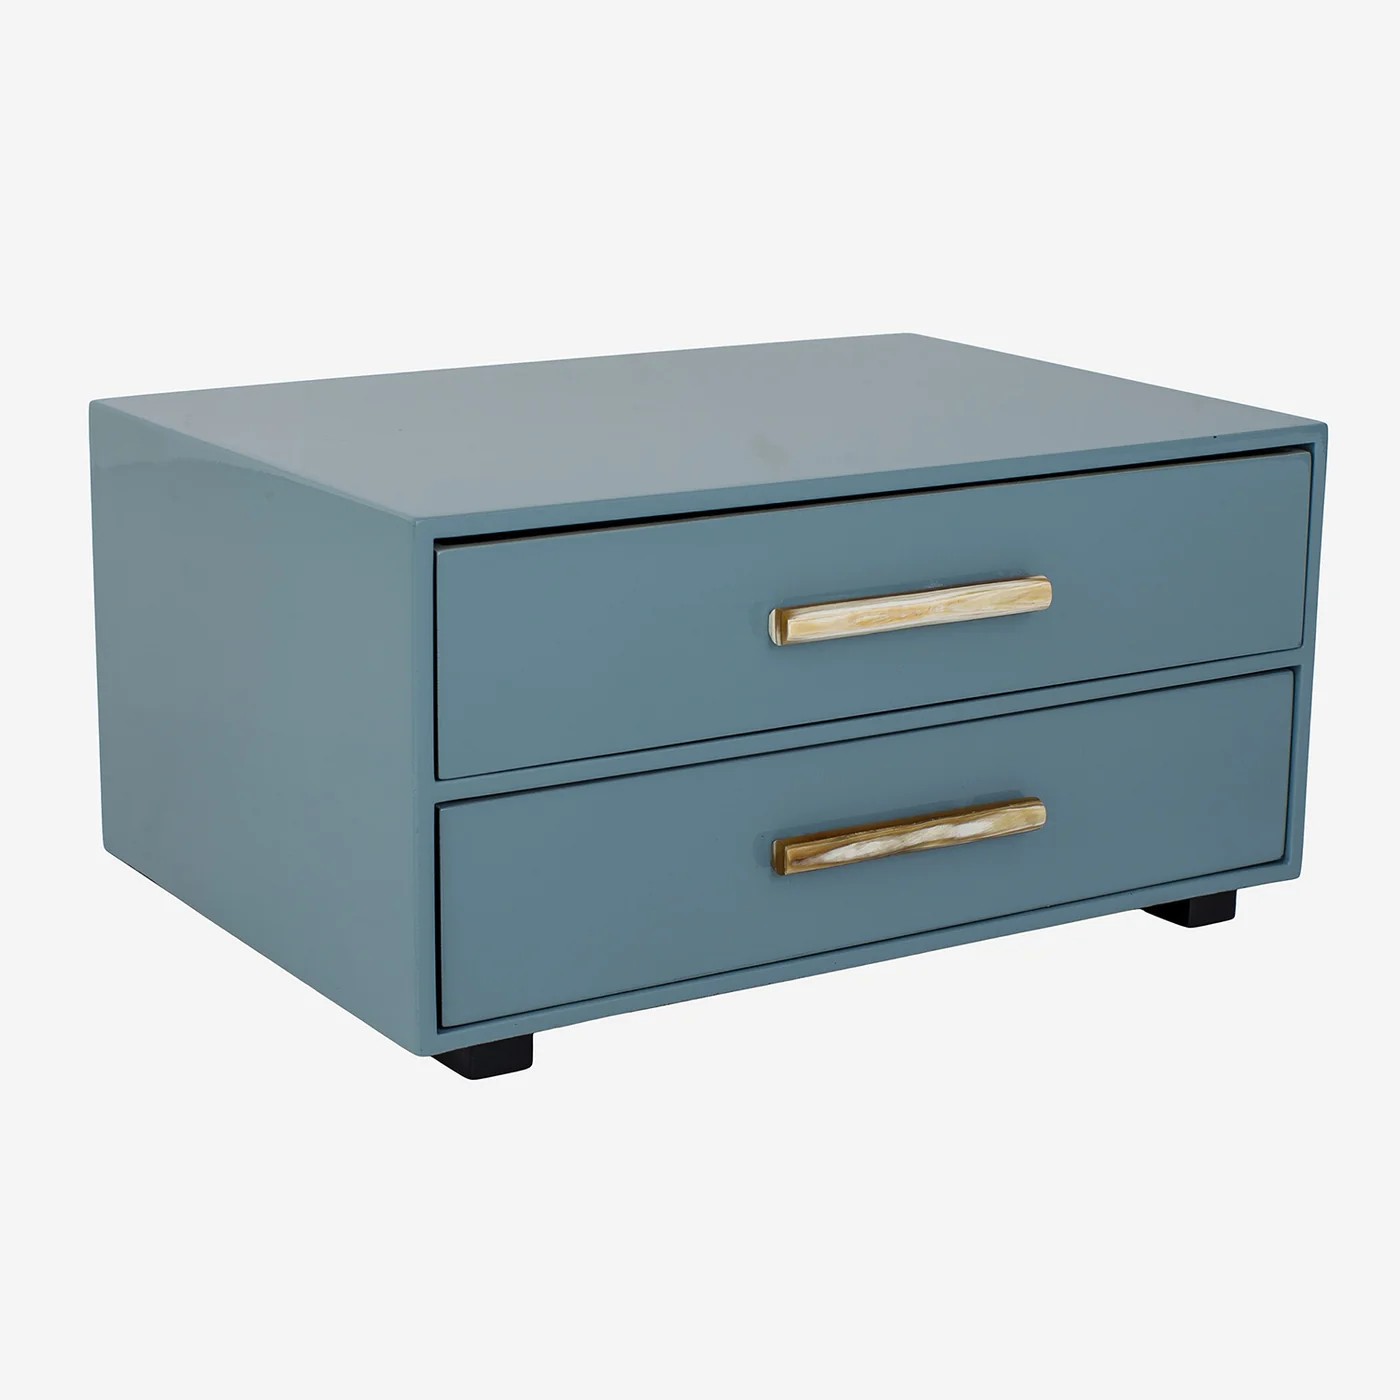 A4 Chest Of Drawers Horn Stick Petrol Blue La3520